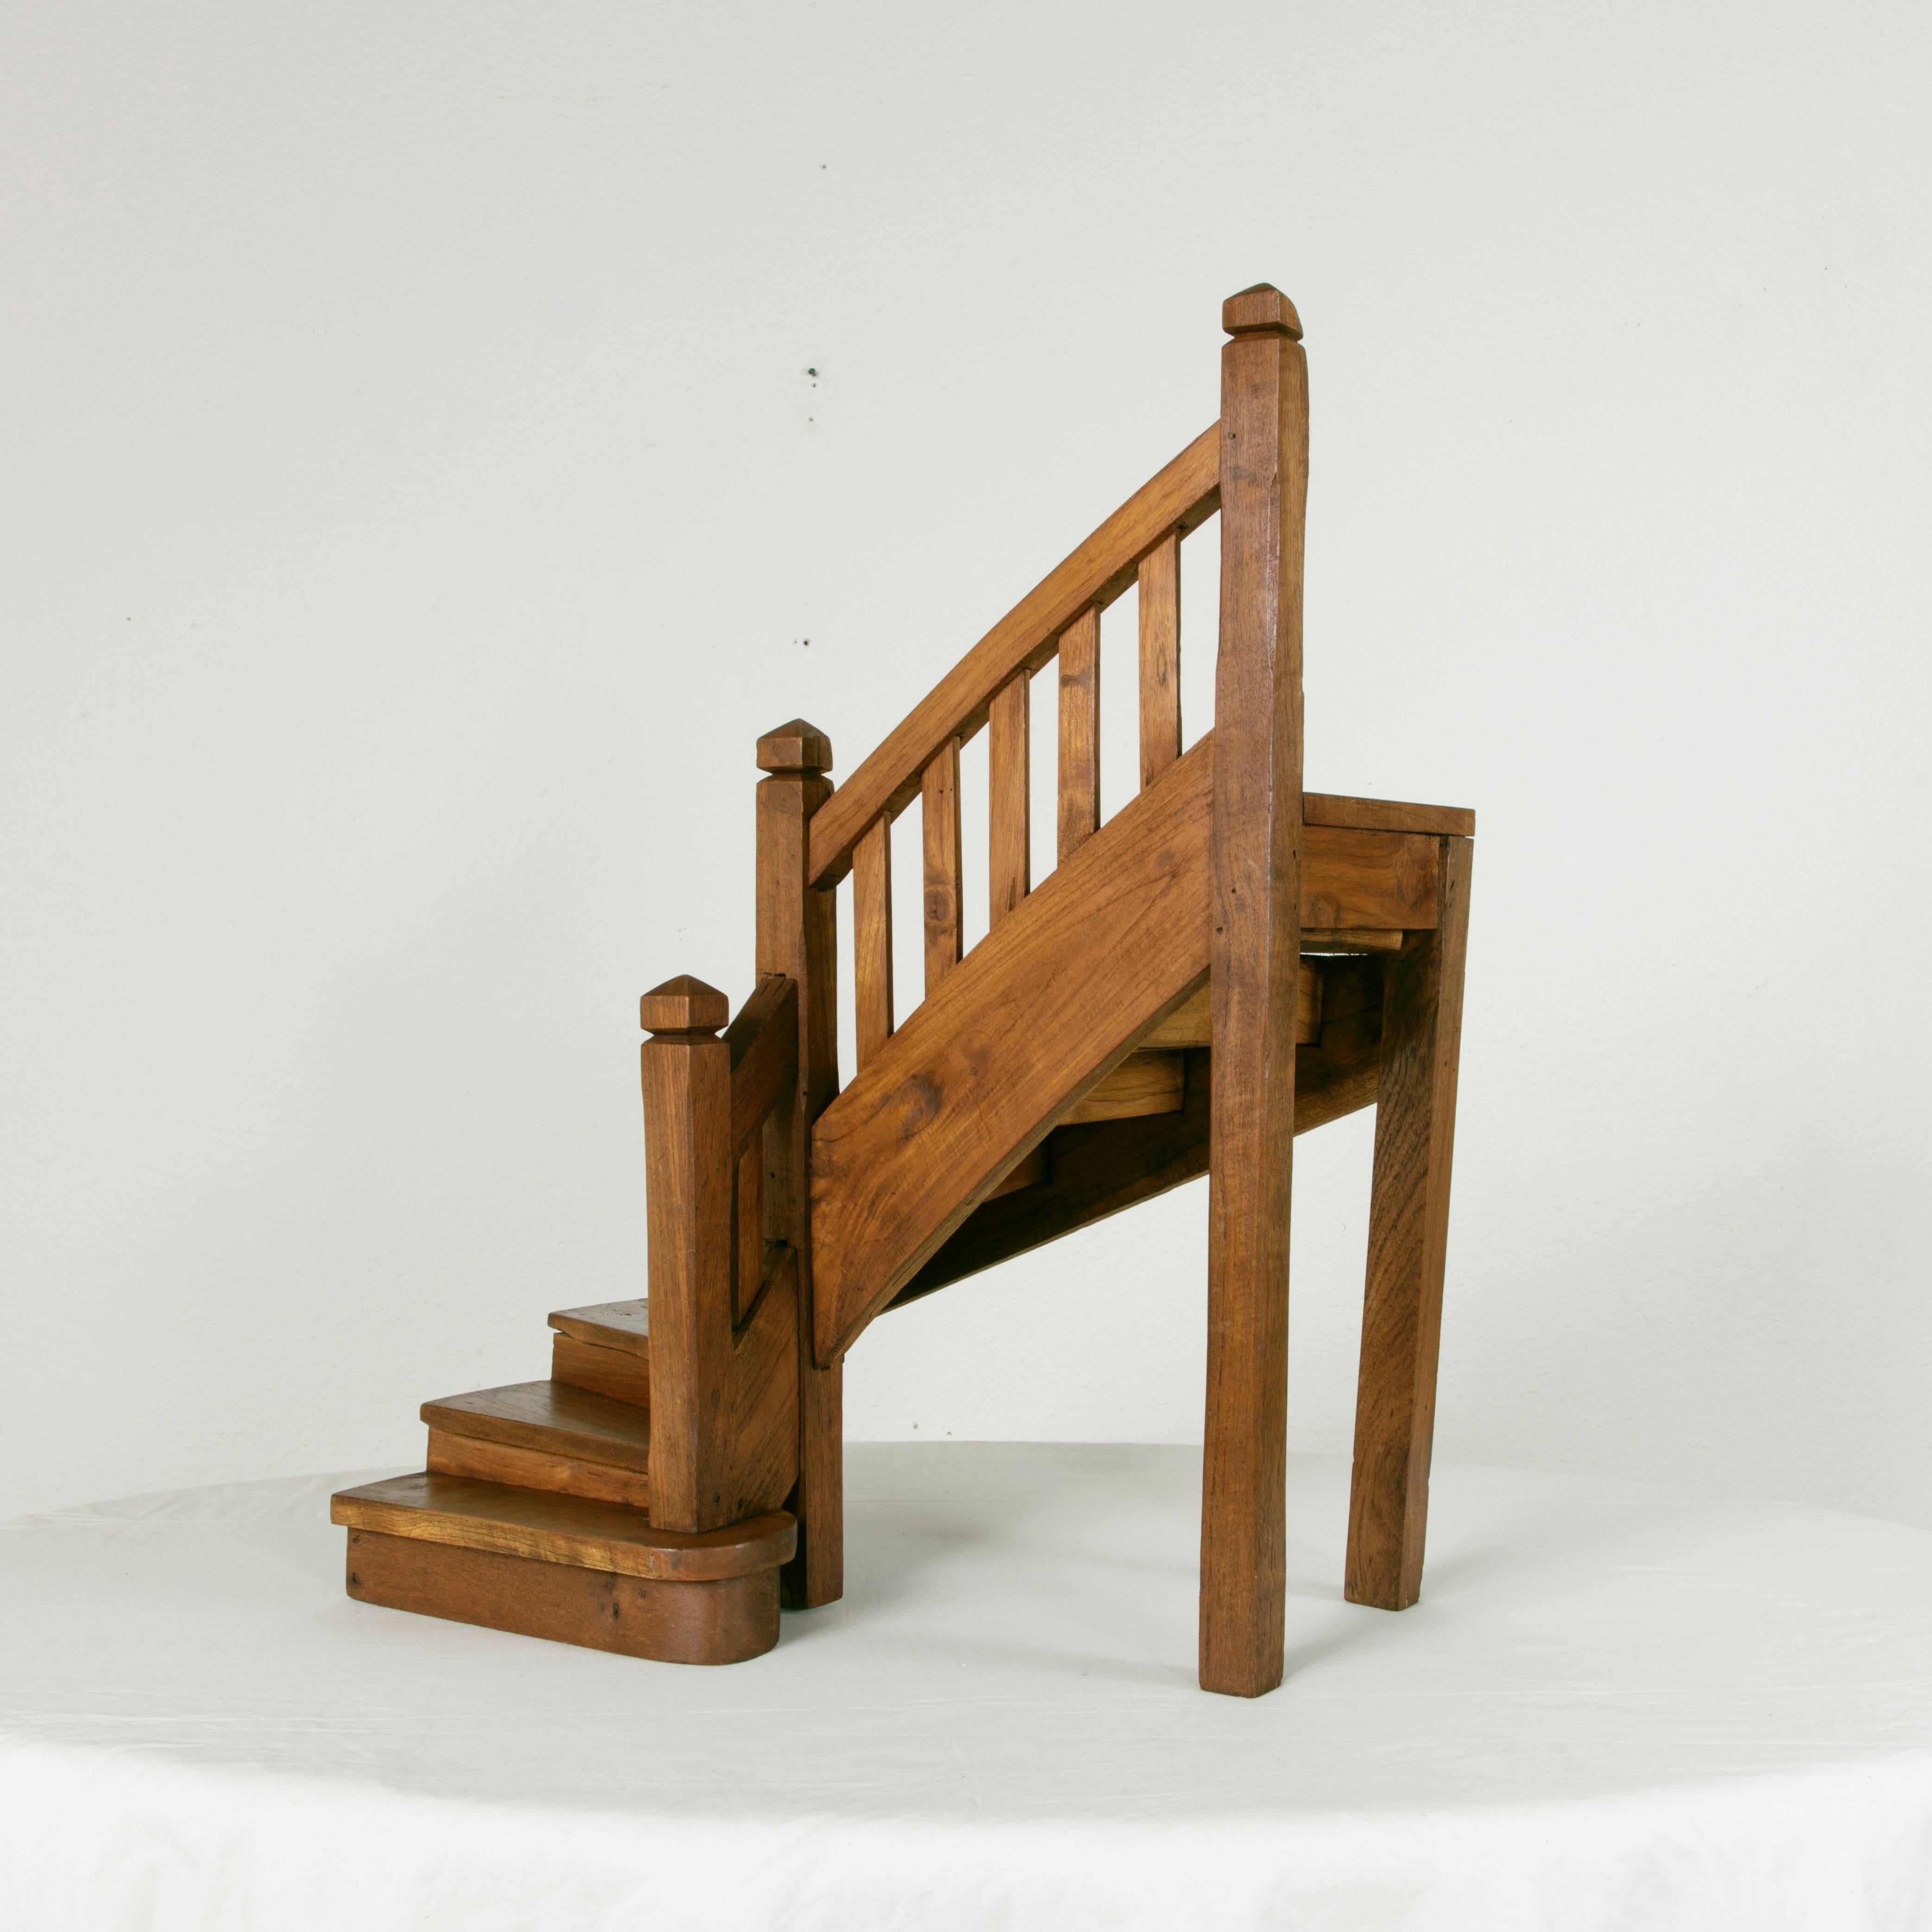 This solid walnut and cherrywood model staircase is a rare find. An unusually large-scale model, this piece displays beautifully on its own as a centerpiece for an entry table or on a large desk. A sought after example of French craftsmanship, with